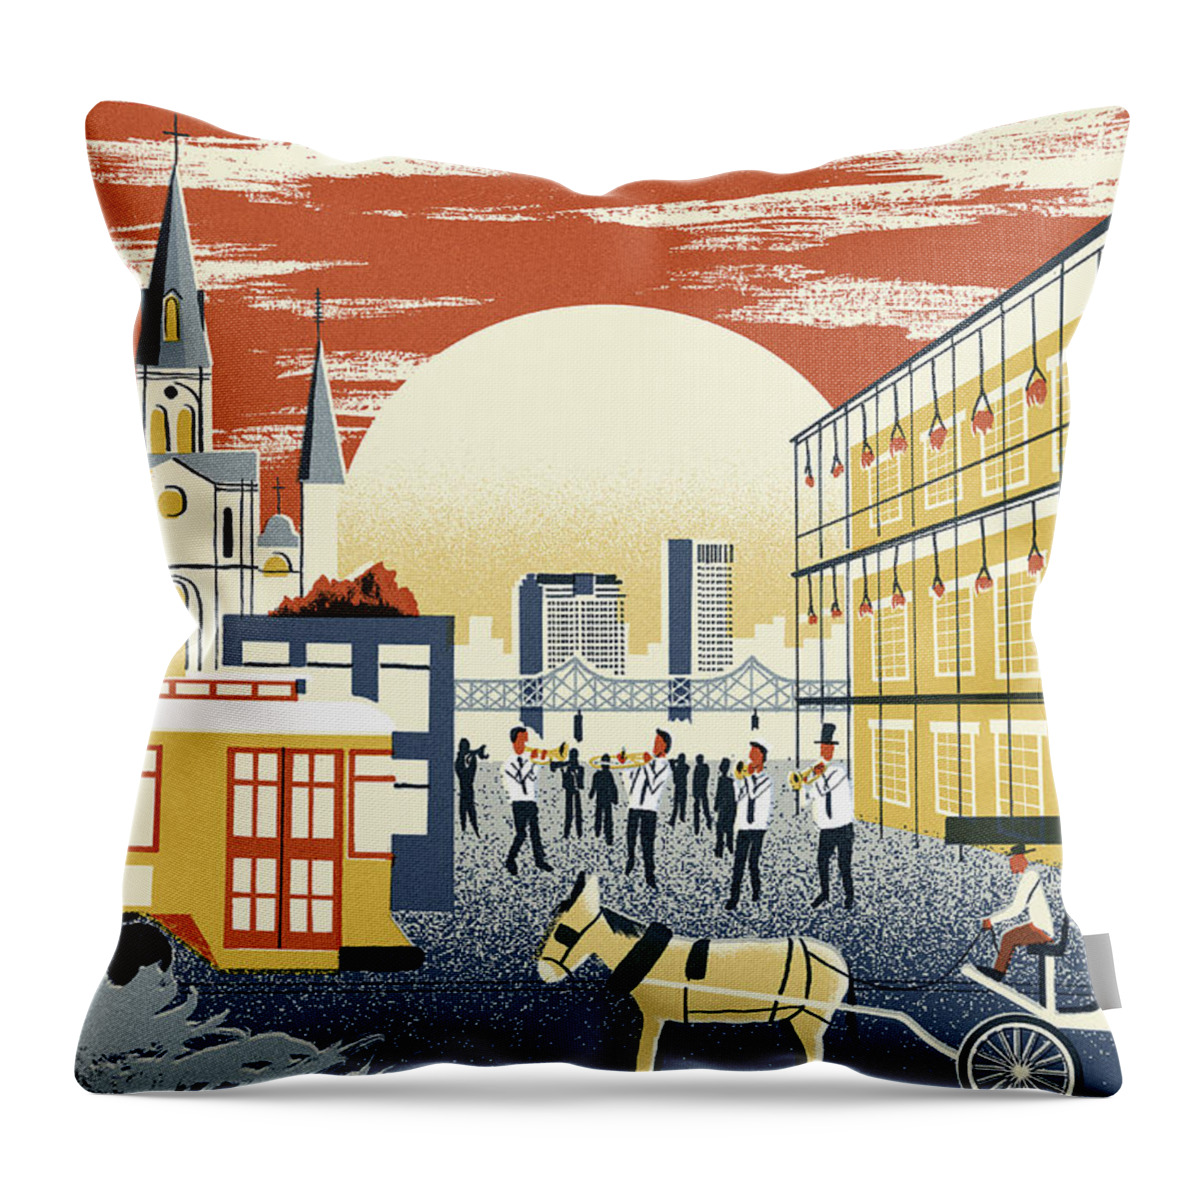 Adult Throw Pillow featuring the photograph Illustration Of Street Musicians In New by Ikon Images